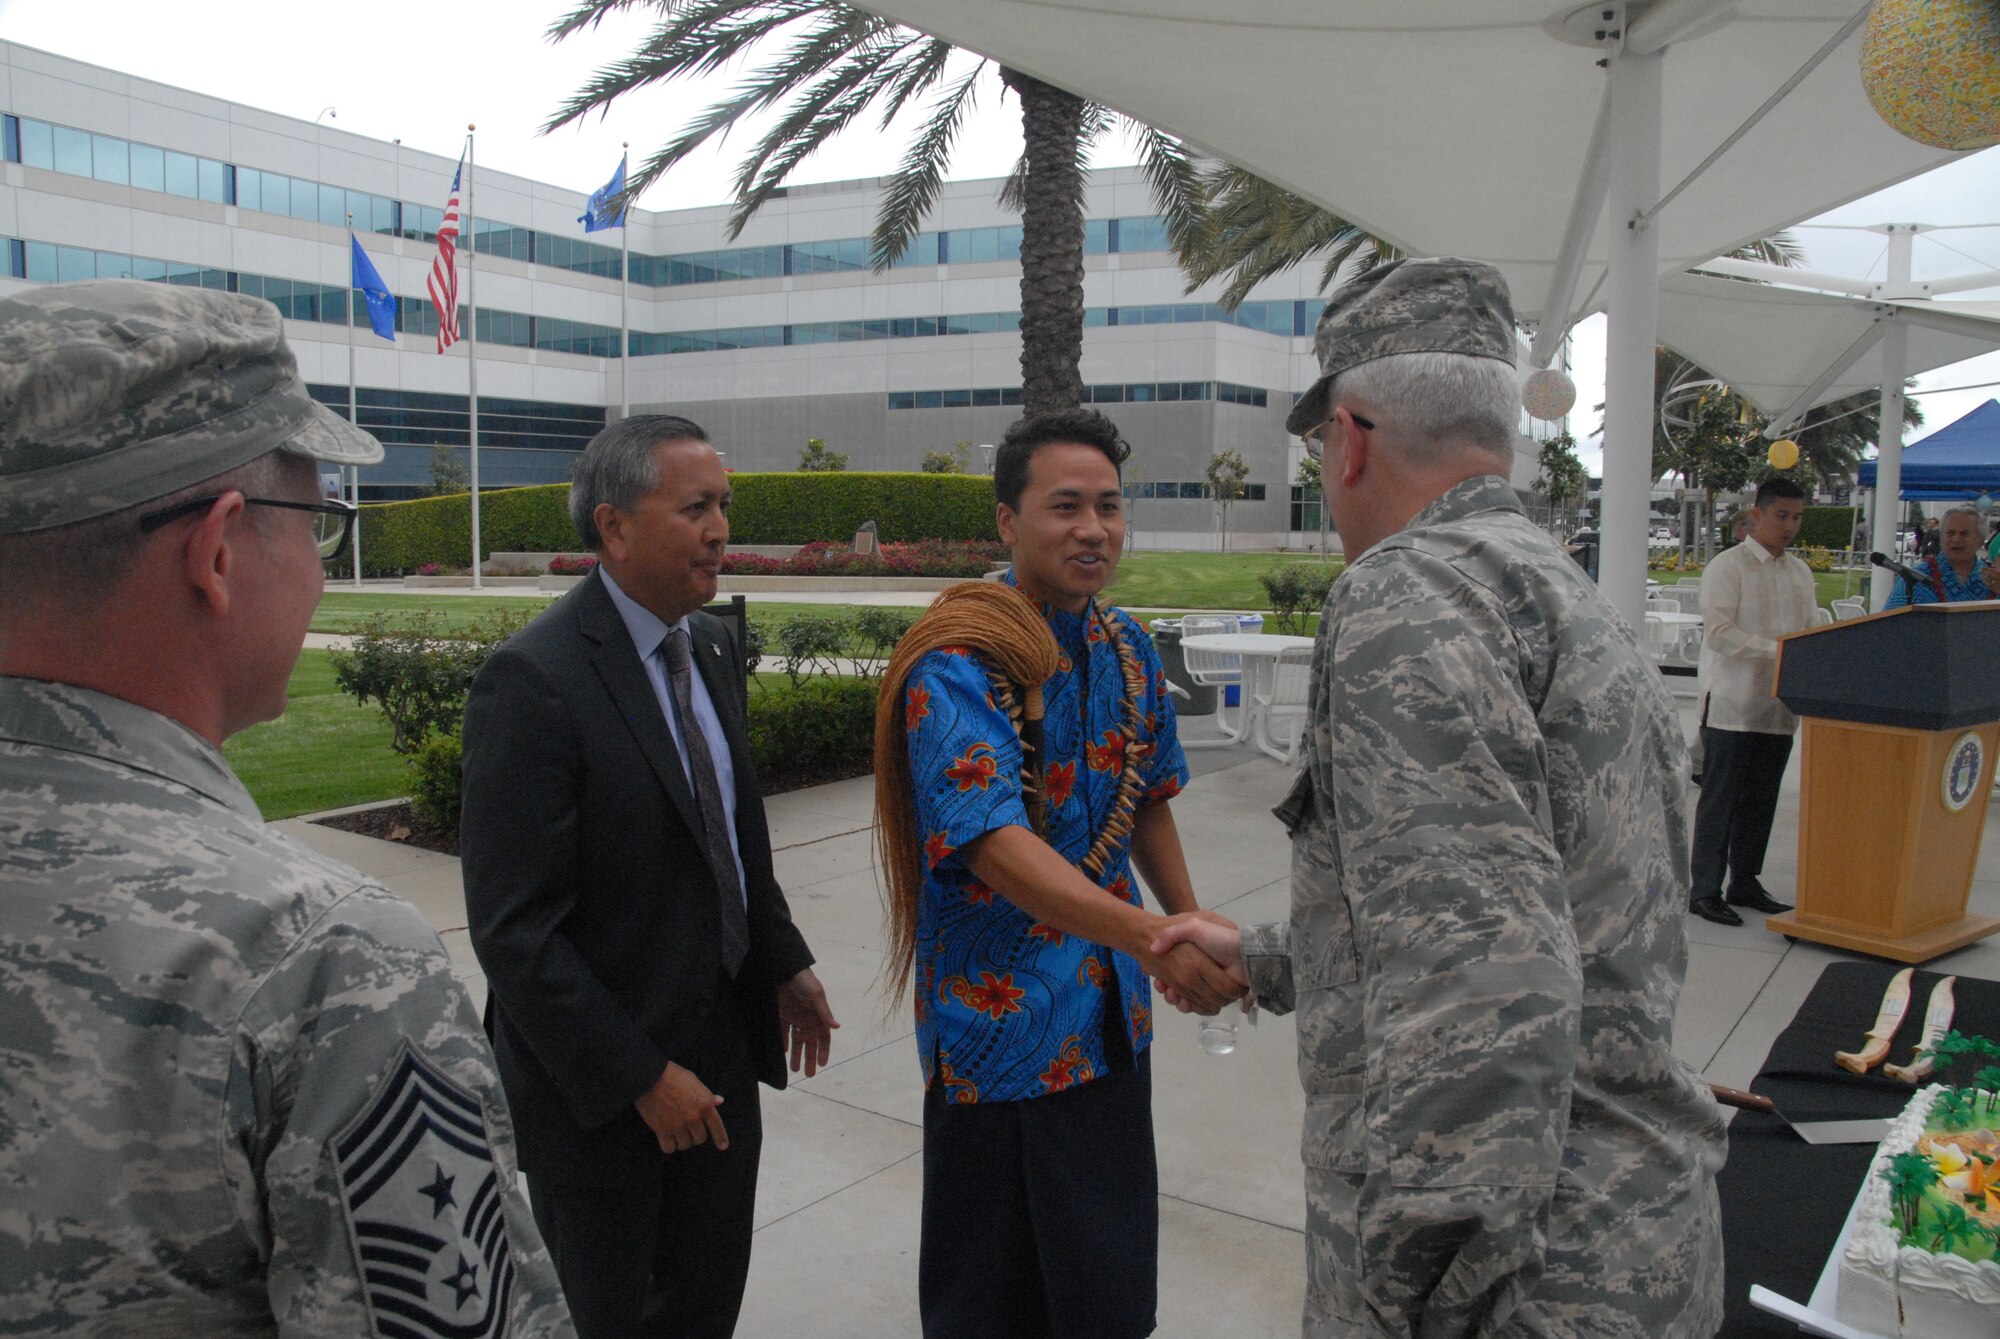 Brig. Gen. Philip A. Garrant, SMC vice commander, Chief  Master Sgt. Scott A. Myers, SMC Command Chief, and Mr. Cordell A. DeLaPena, director of SMC’s Program Management and Integration Directorate, say “Talofa” (Hello) to Charles Ulualofaiga Coleman II, after his opening remarks at the 25th annual Asian Pacific Islander Heritage Celebration.